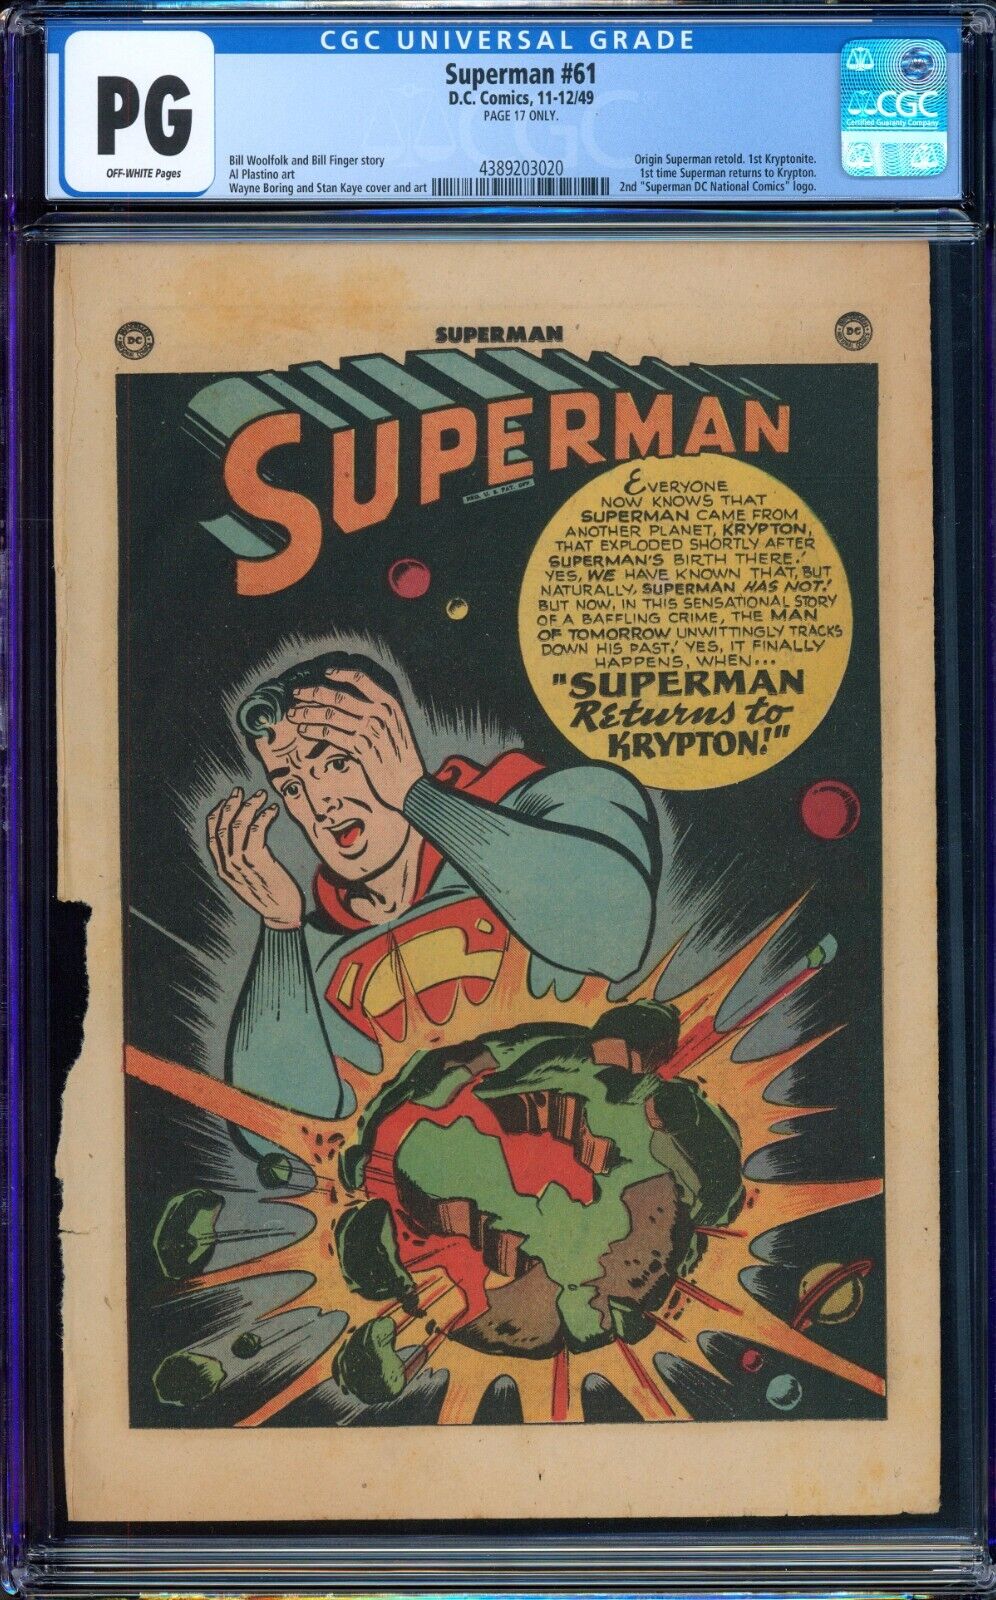 Superman #61, 1949, CGC PG, page 17 only, 1st image of Kryptonite on this page